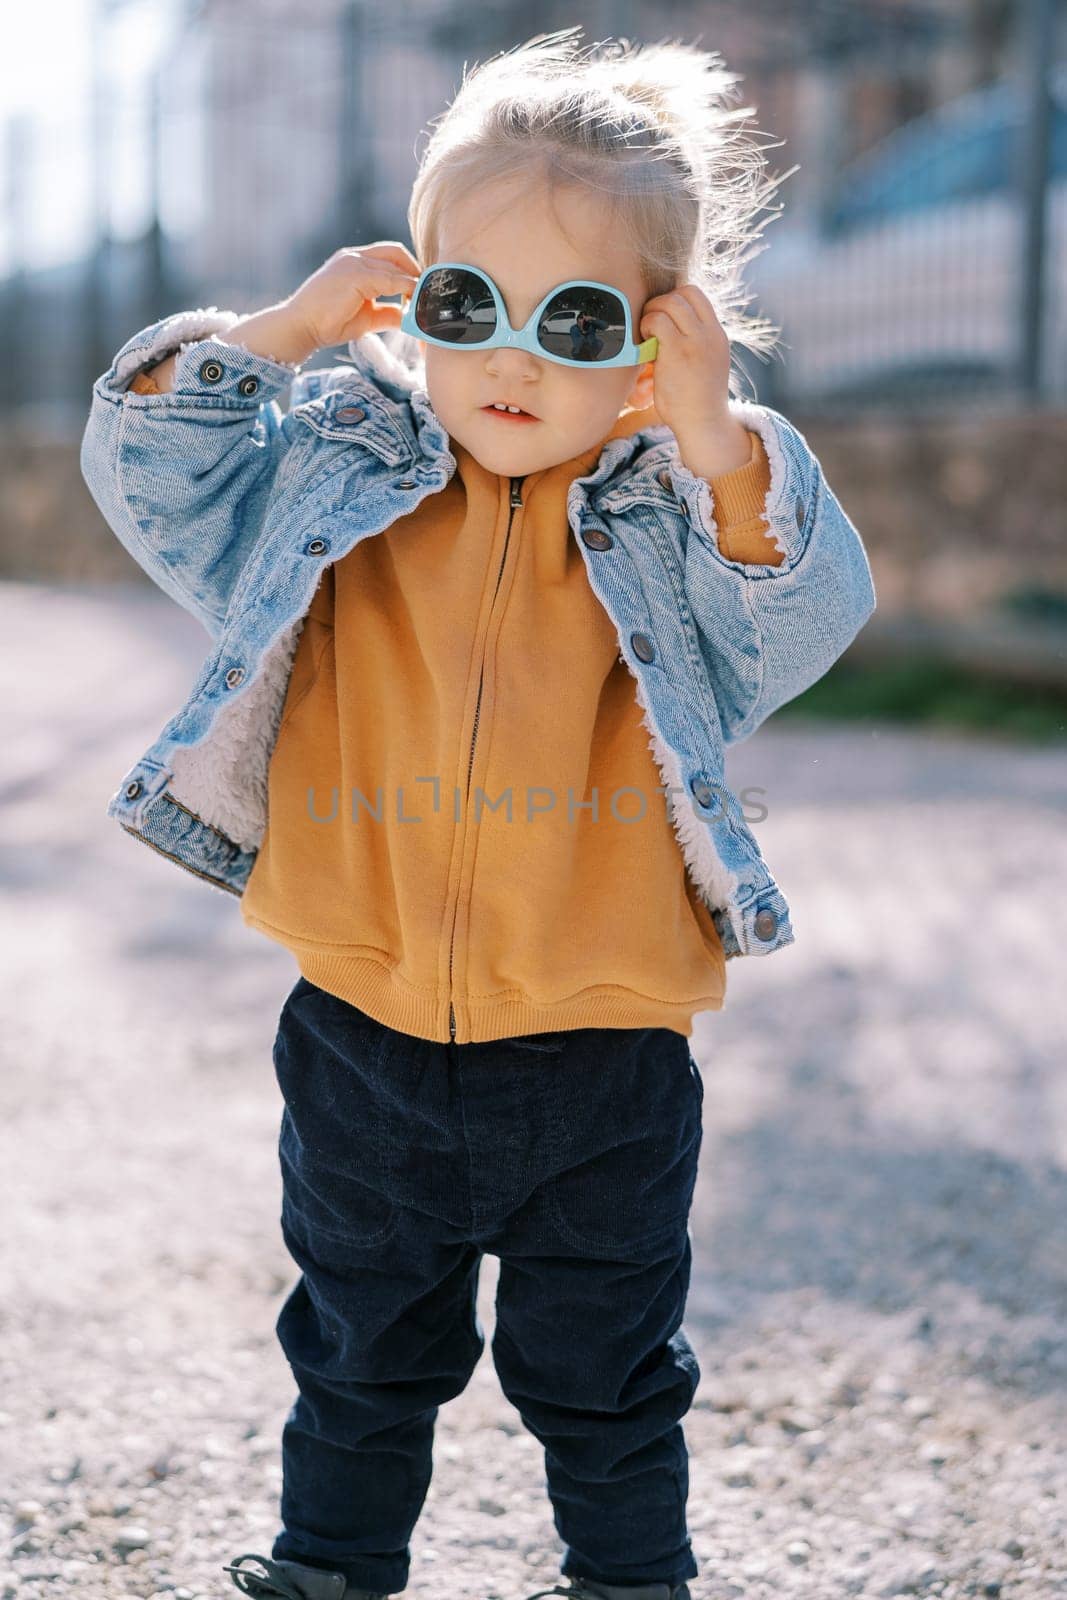 Little girl trying on sunglasses upside down by Nadtochiy